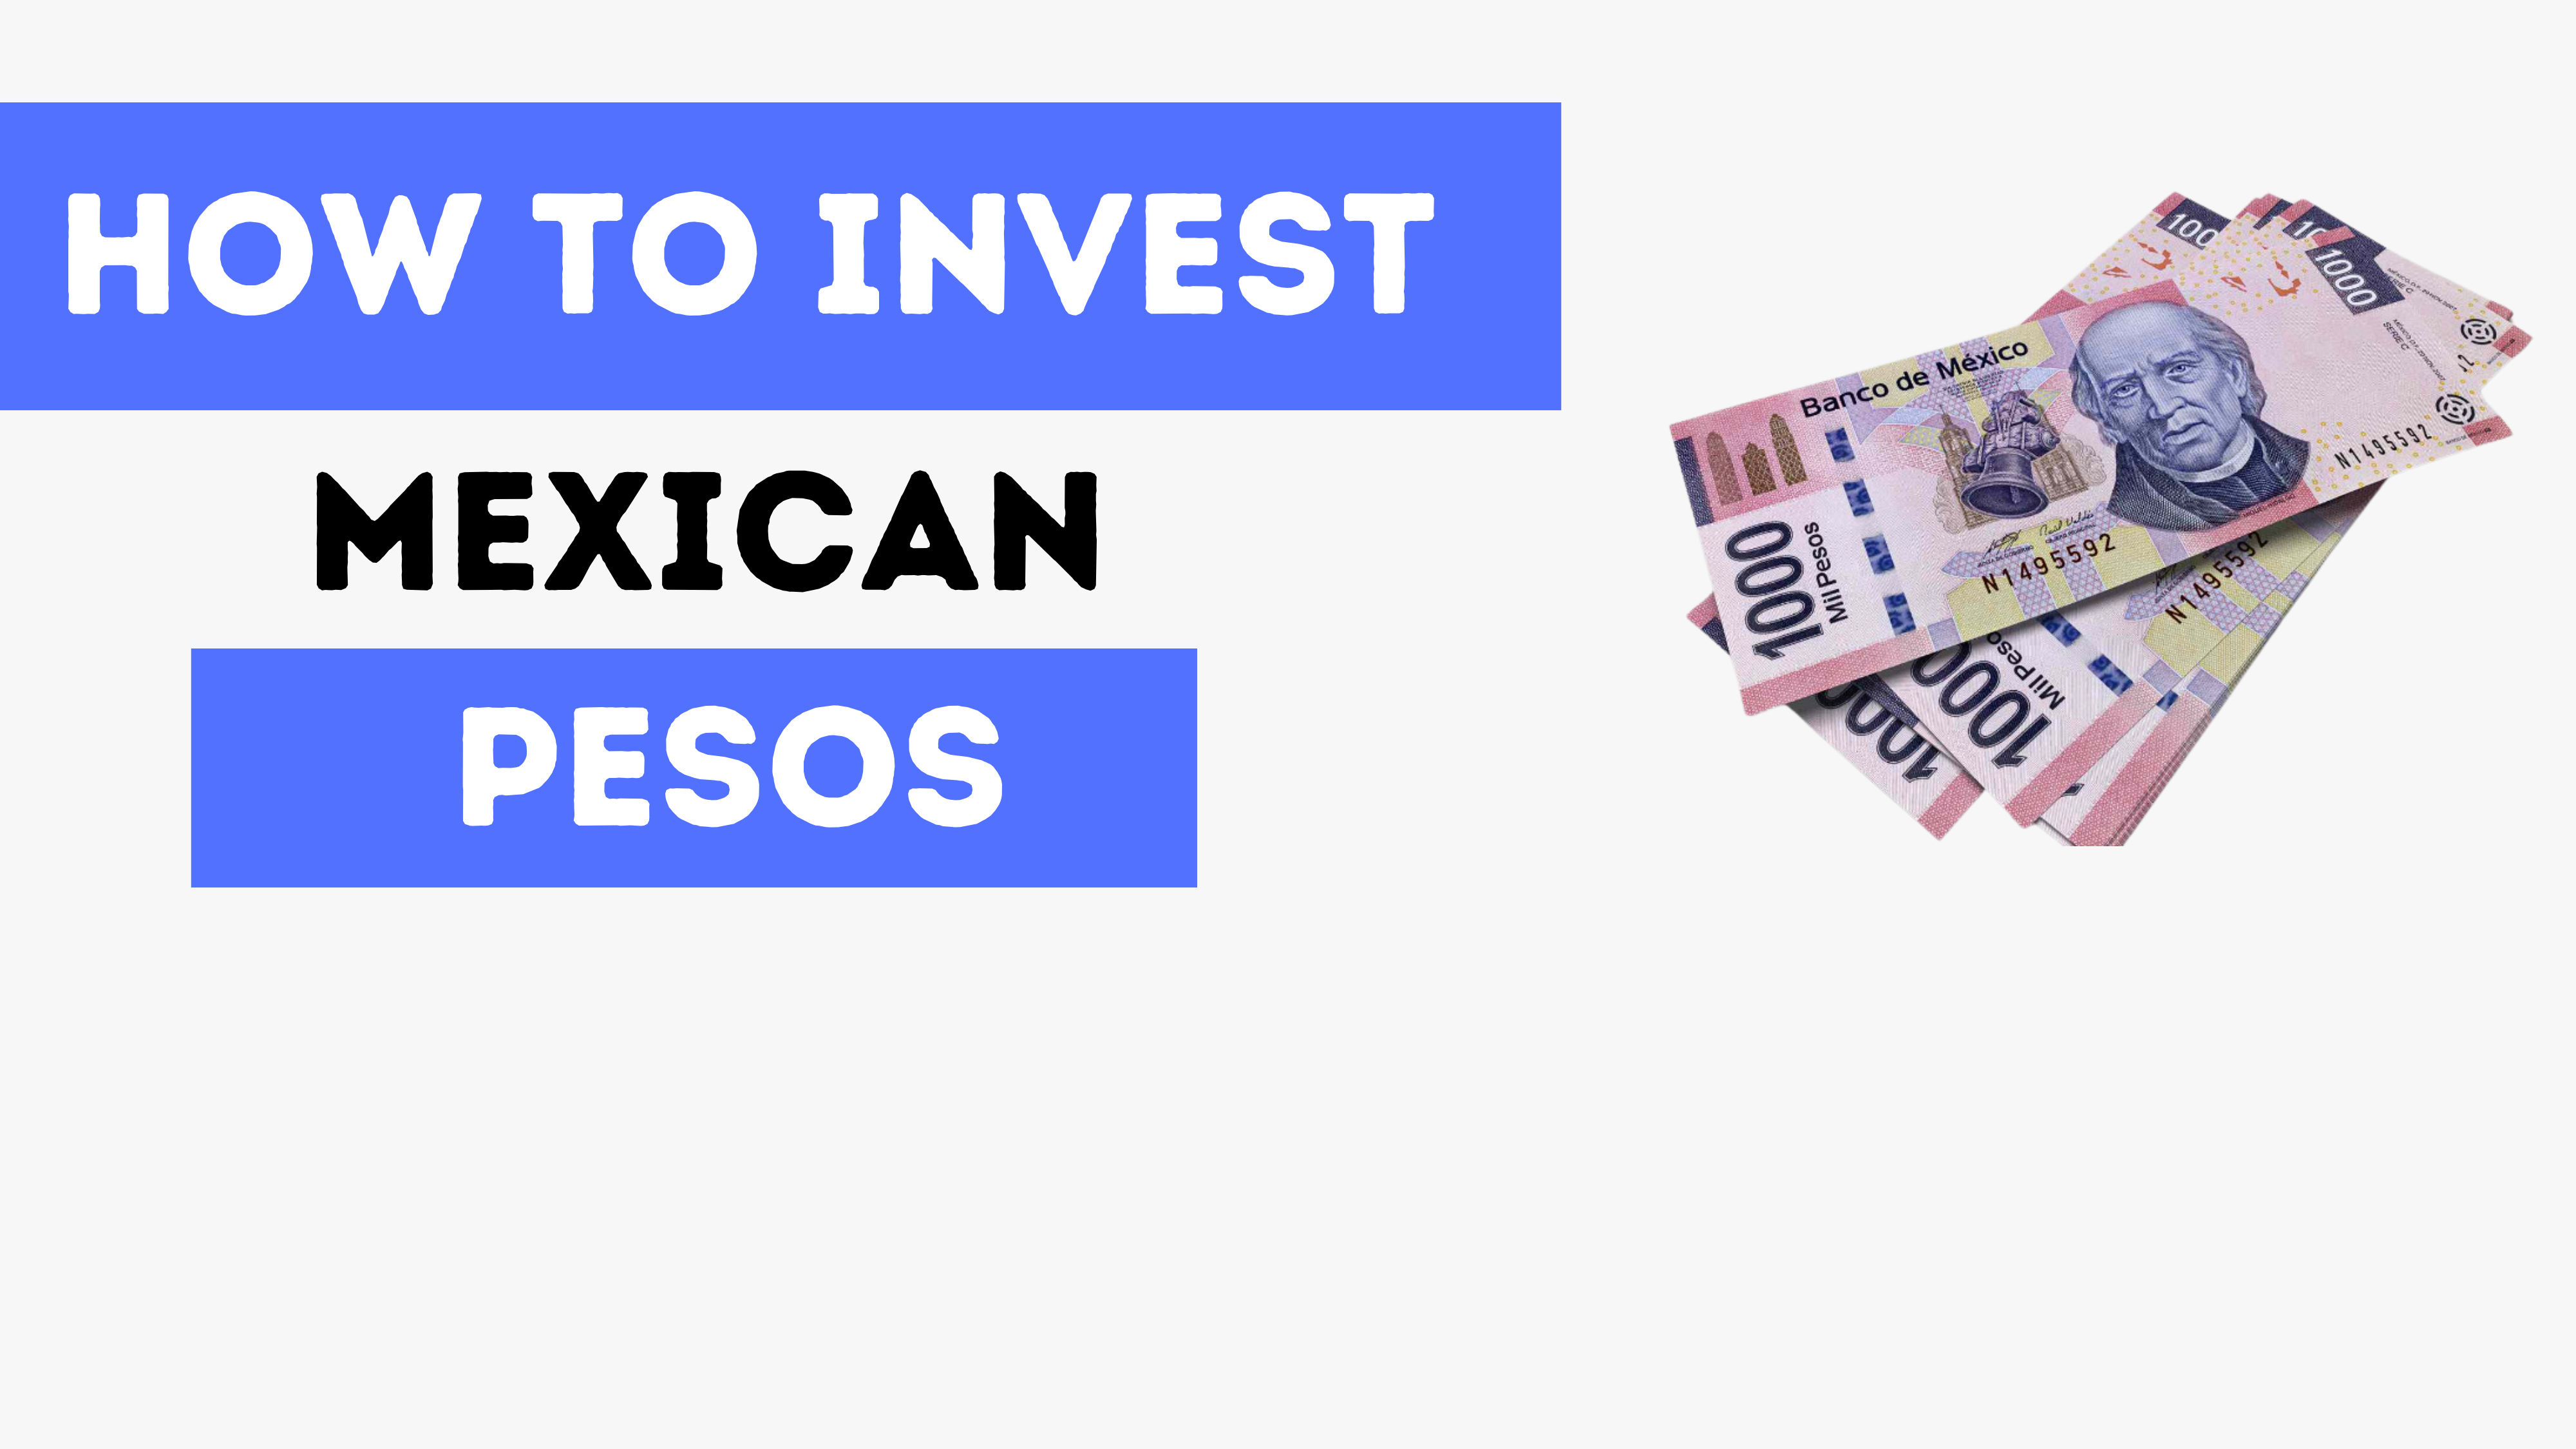 How to Invest in Mexican Pesos